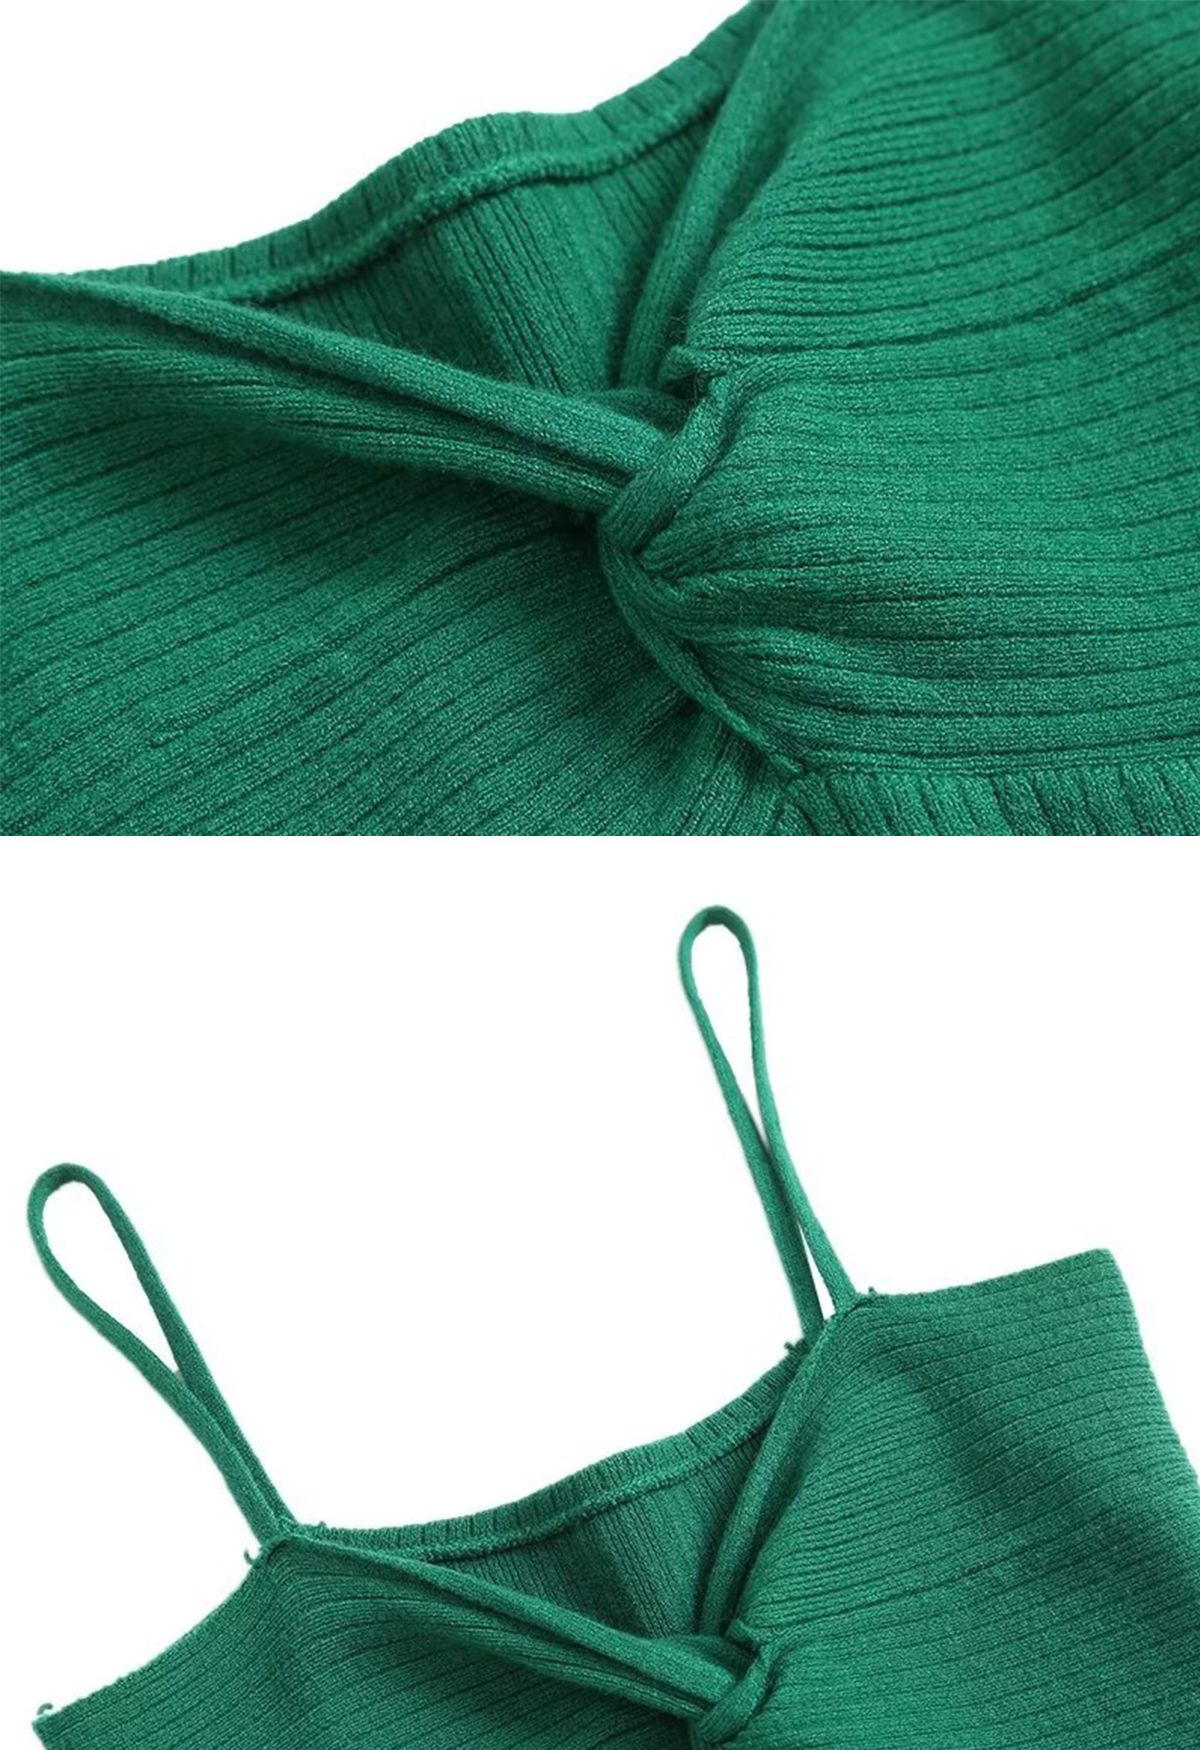 Twisted Front Ribbed Cami Top and Cardigan Set in Green